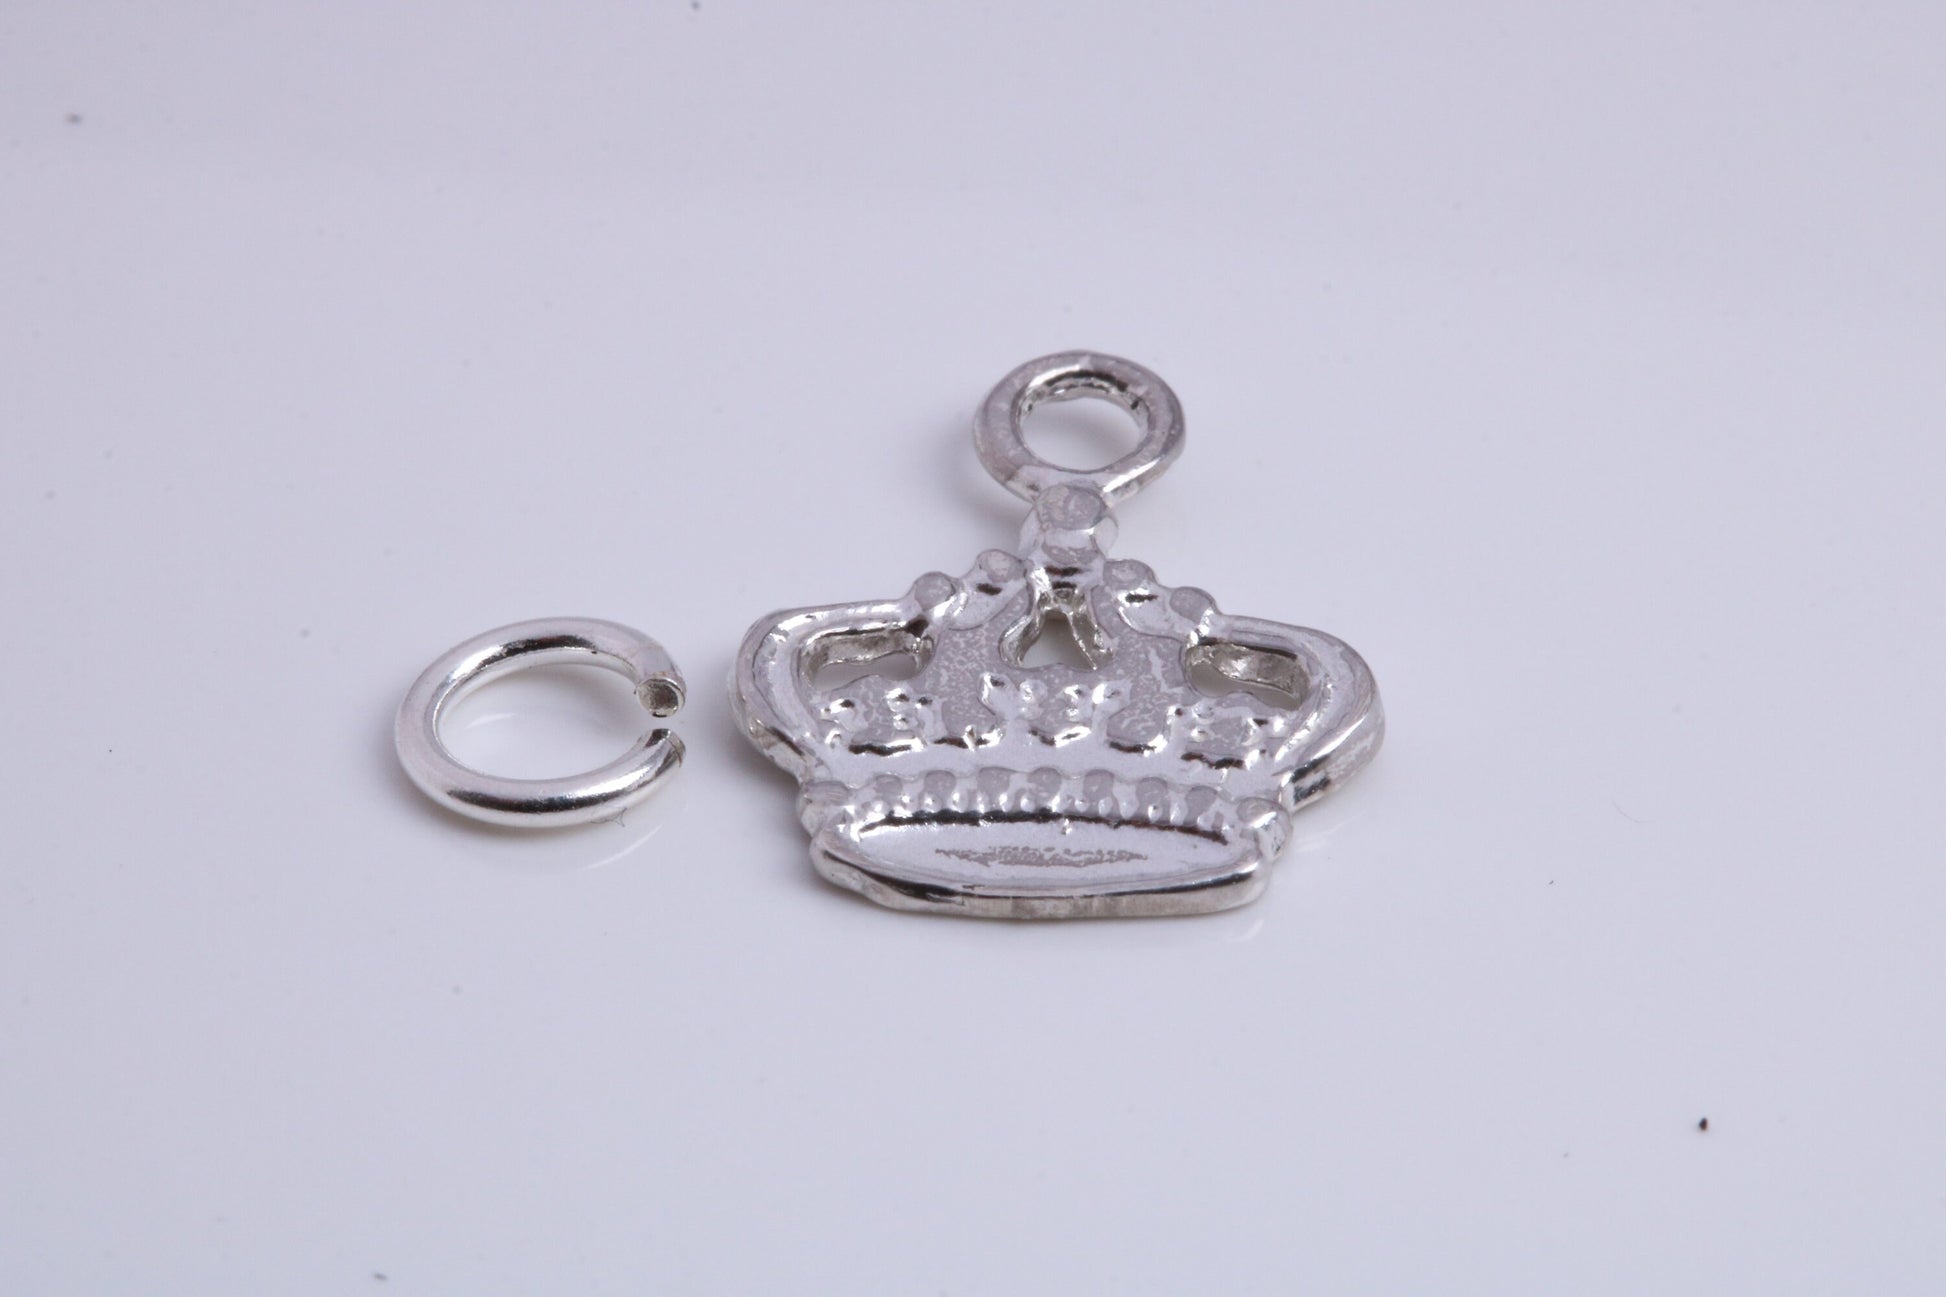 Royal Crown Charm, Traditional Charm, Made from Solid 925 Grade Sterling Silver, Complete with Attachment Link